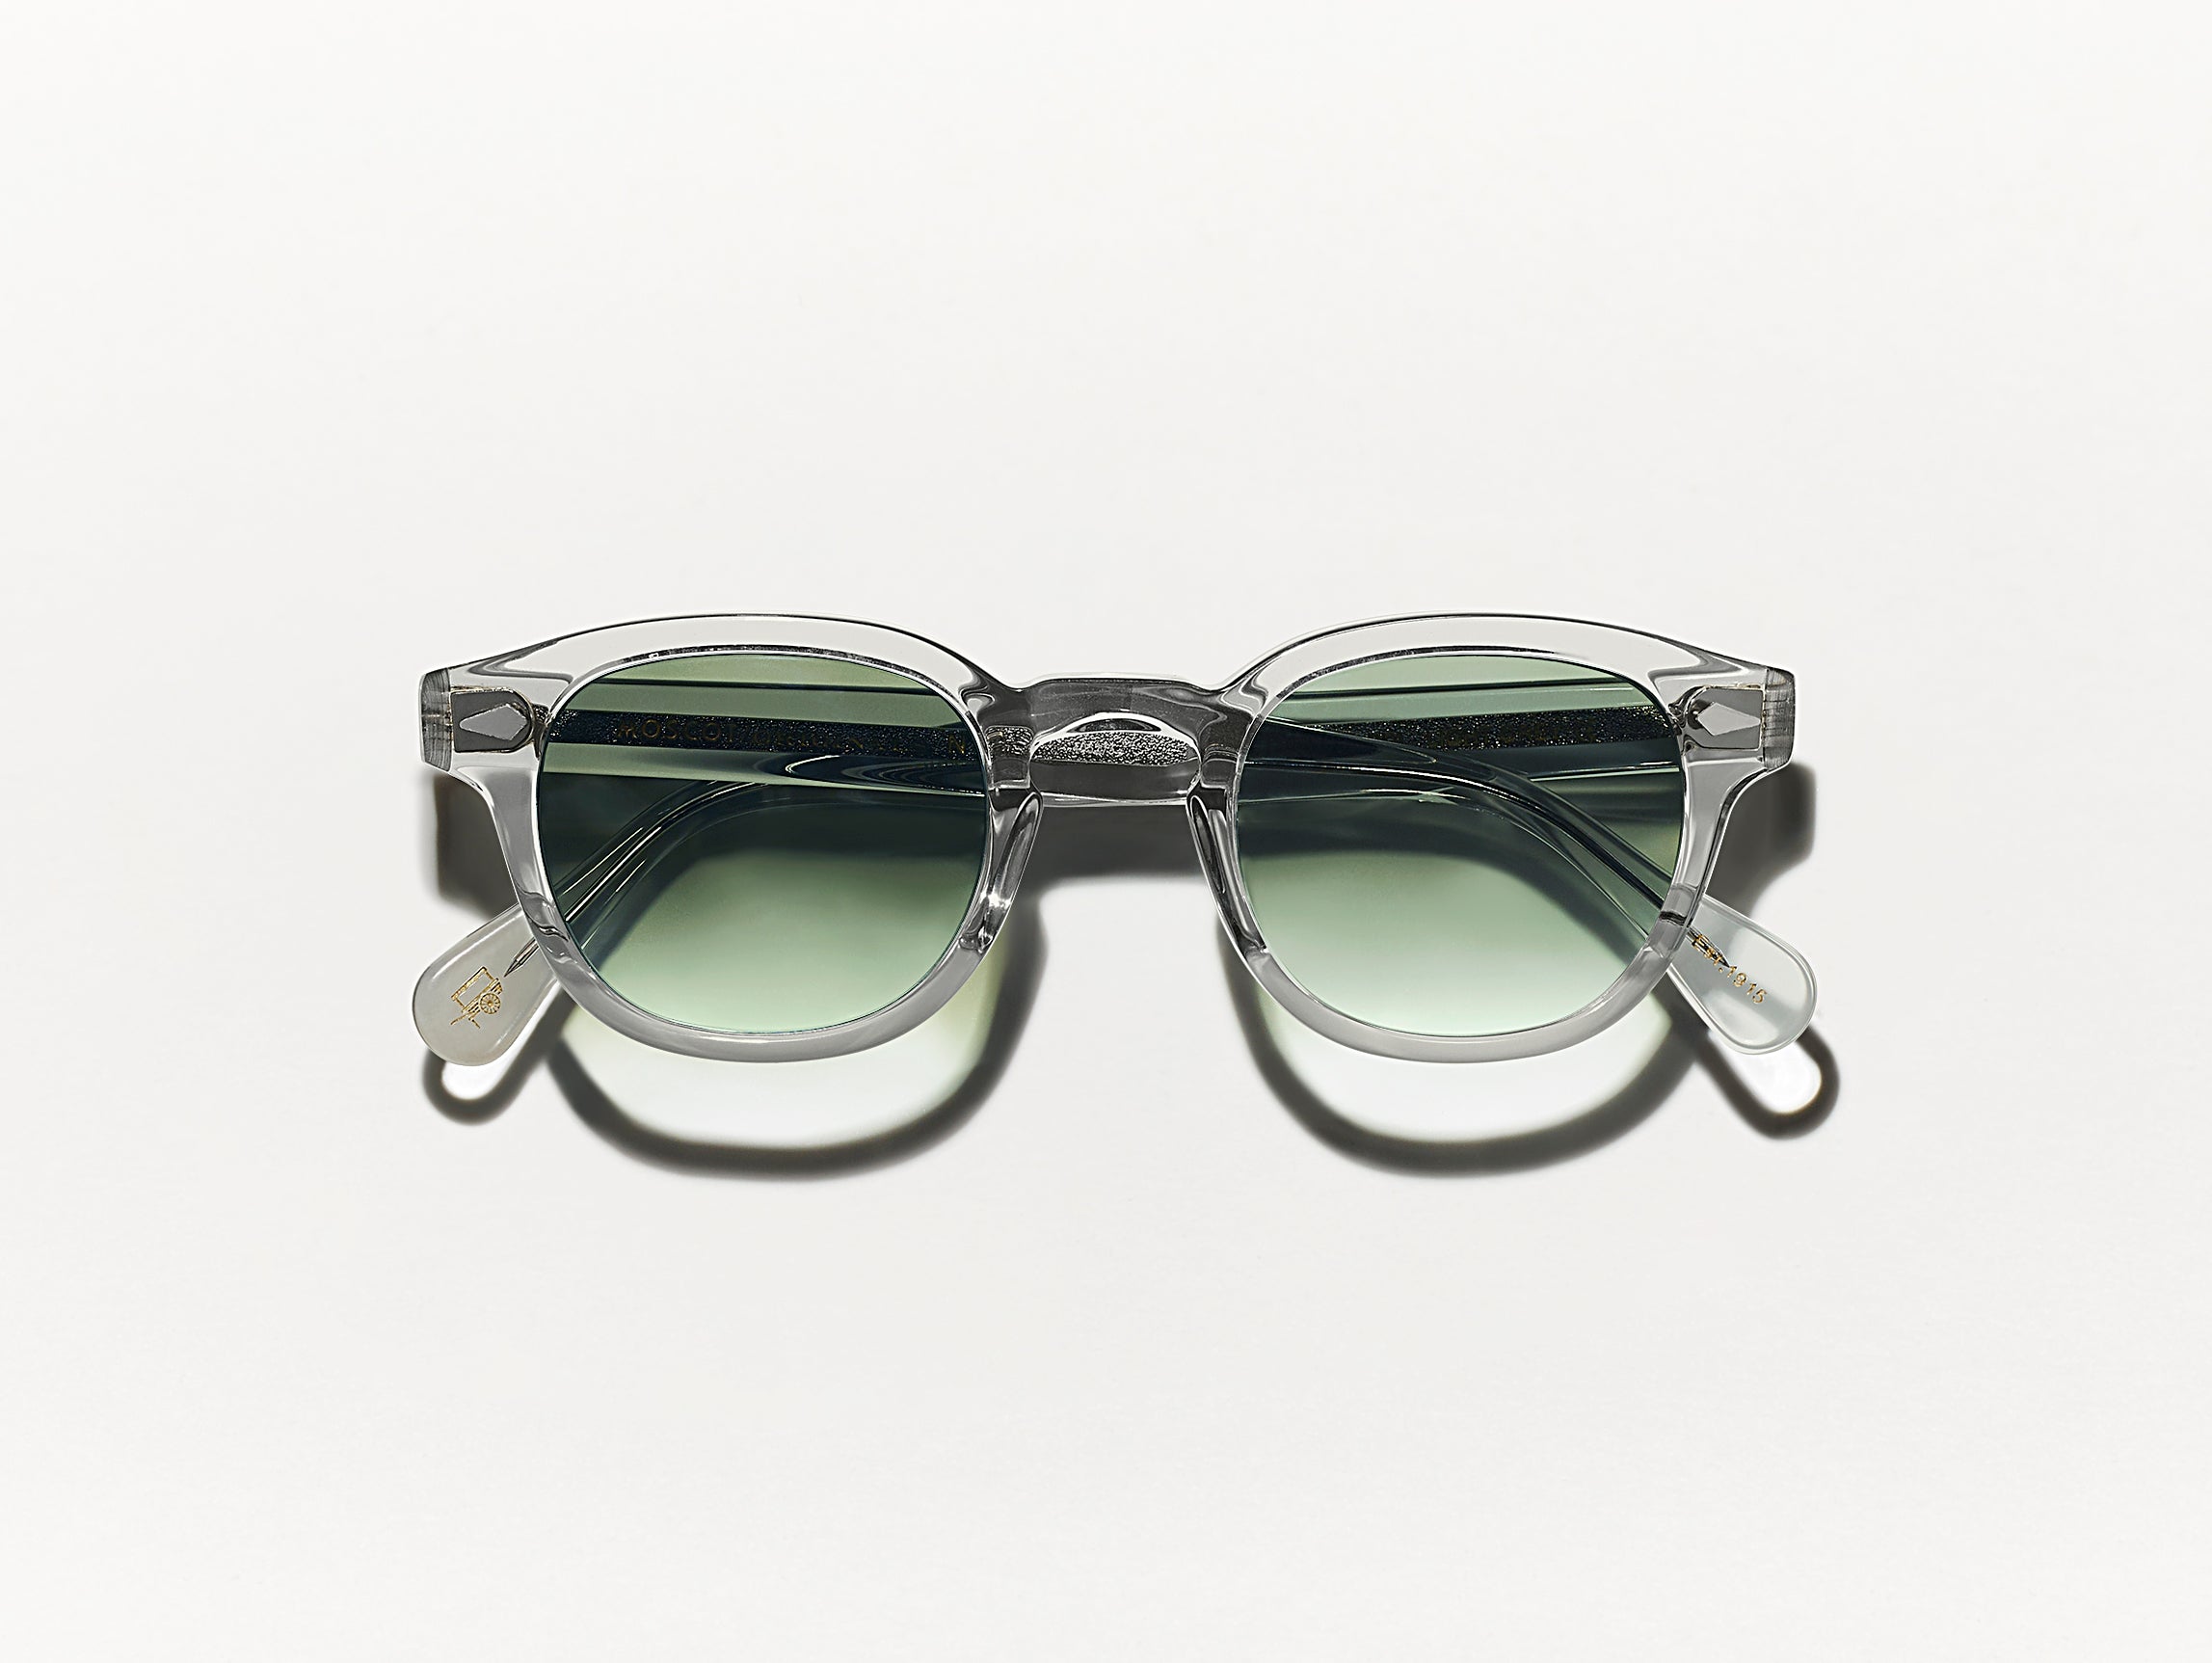 #color_g-15 fade | The LEMTOSH Light Grey with G-15 Fade Tinted Lenses